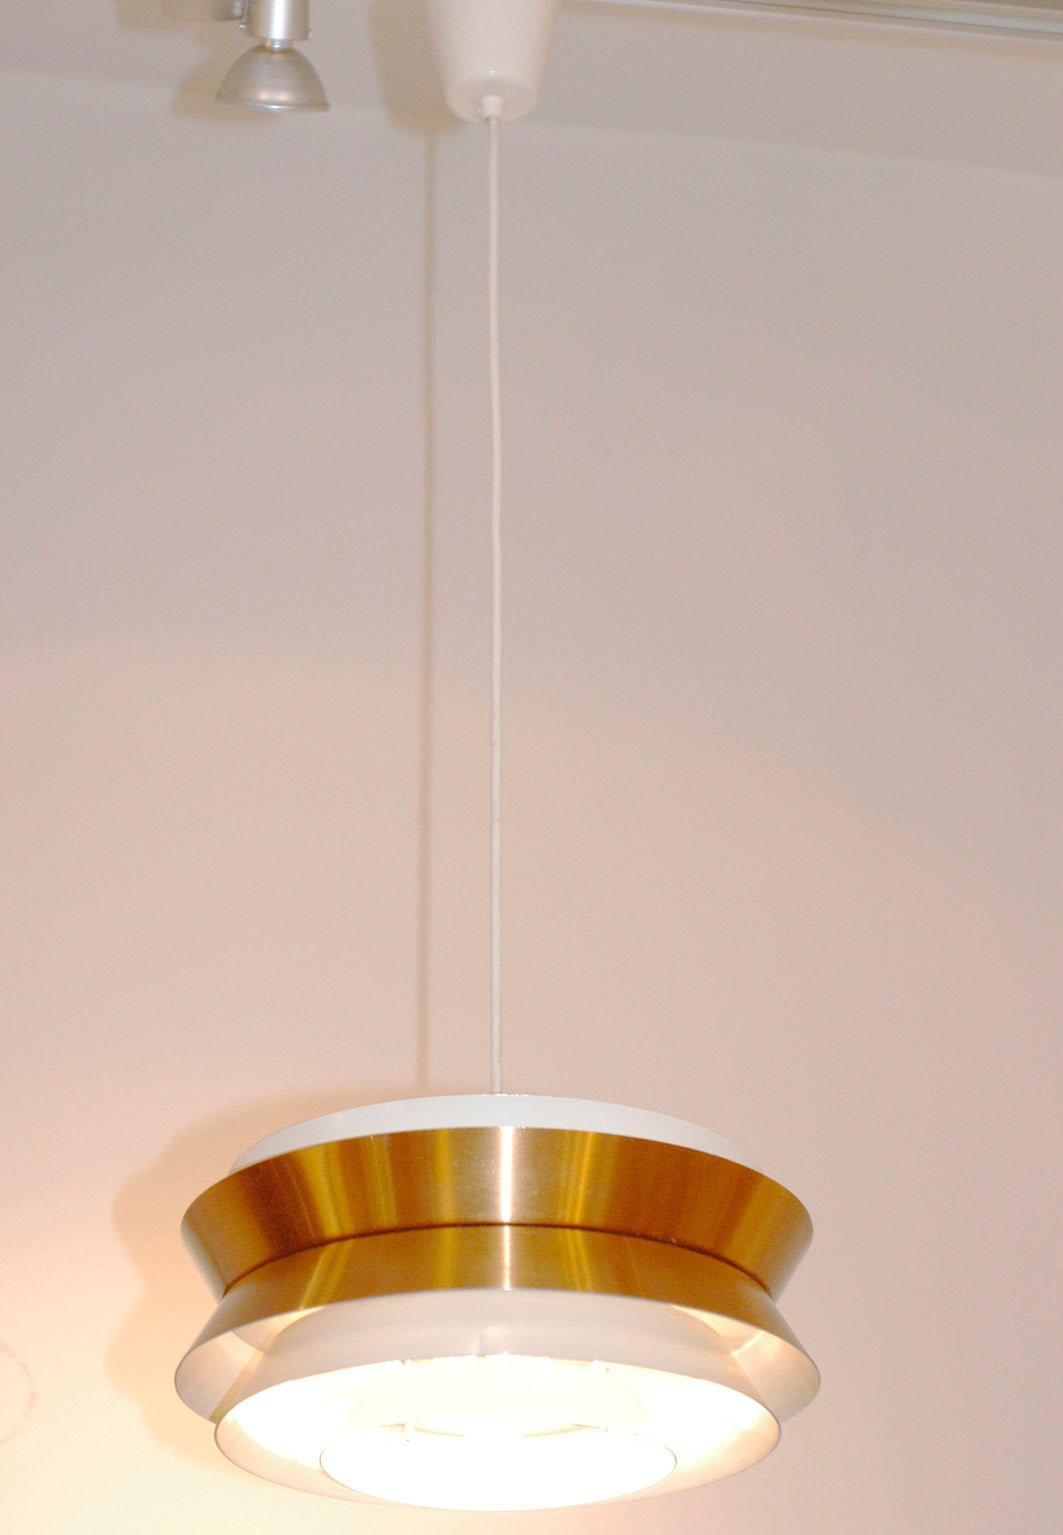 Great Scandinavian Modern pendant lamp, version with white lacquered metal and copper.
Perfect addition to any modern and Mid-Century Modern interior!